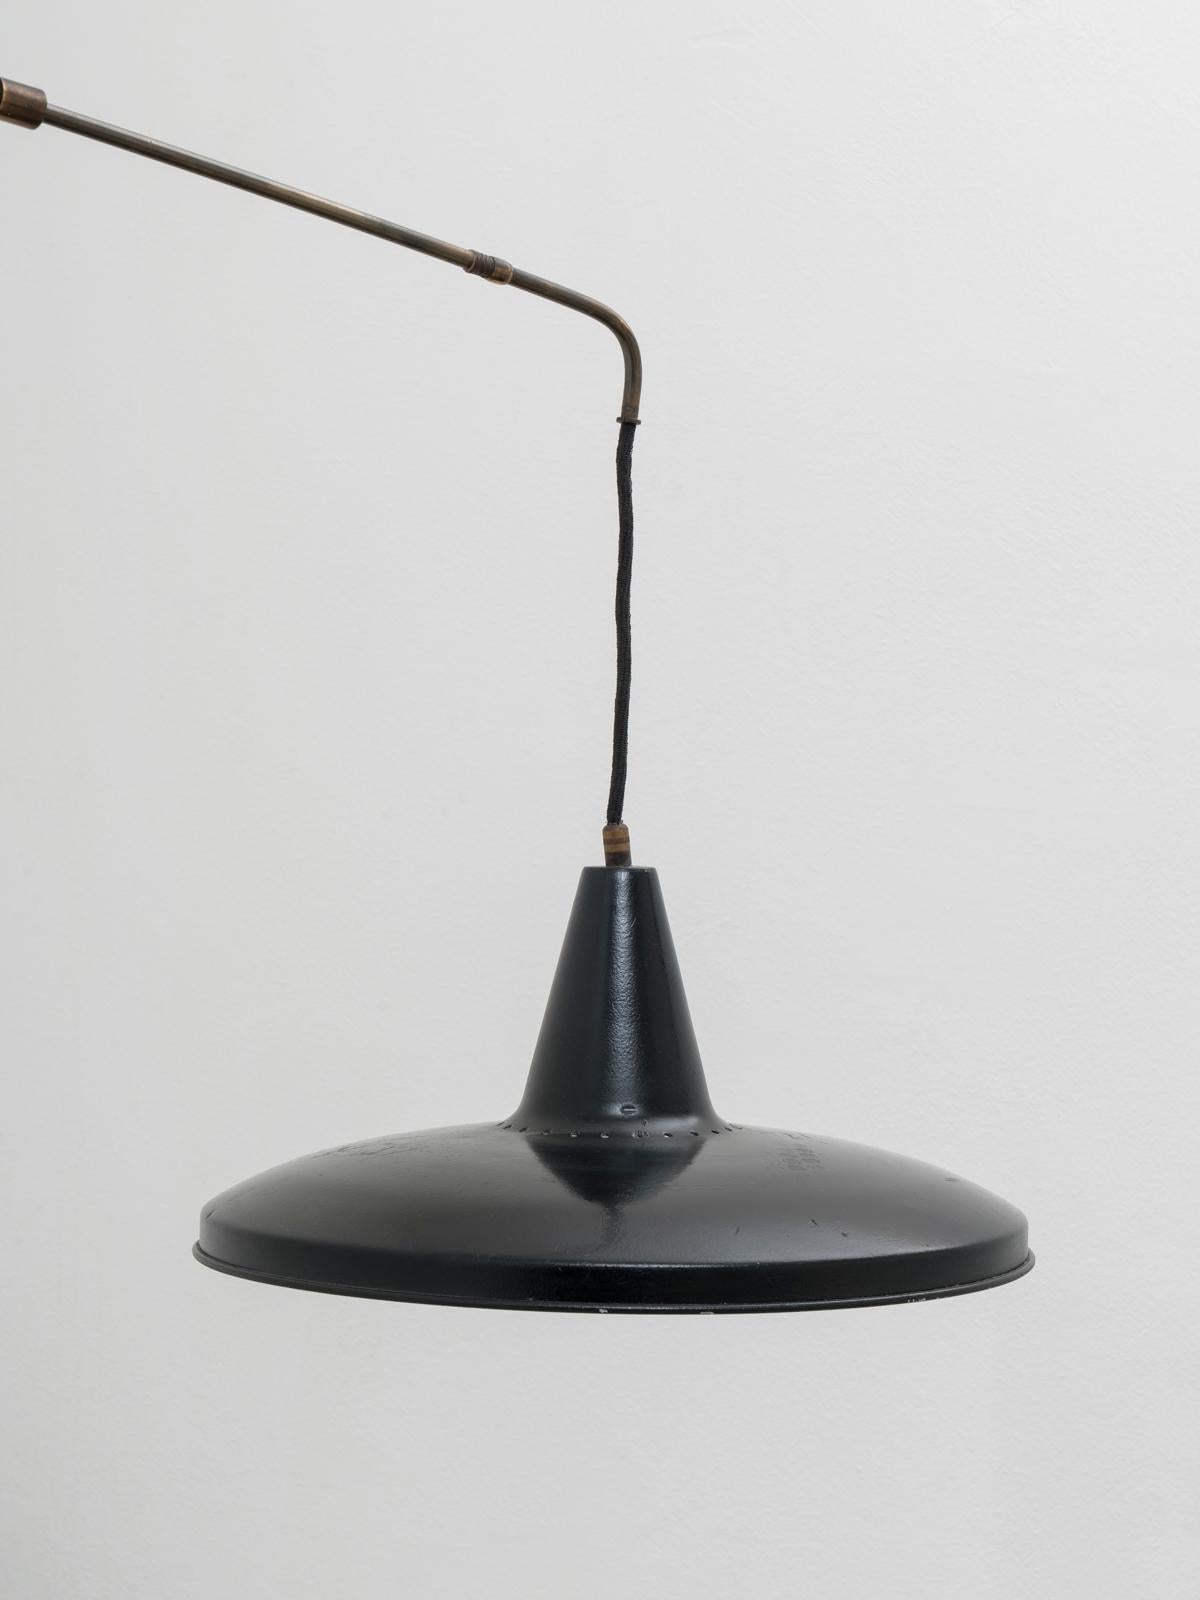 Italian Mid-Century Modern Brass Black Swiveling Telescopic Wall Lamp, 1950s In Good Condition For Sale In Milan, Italy